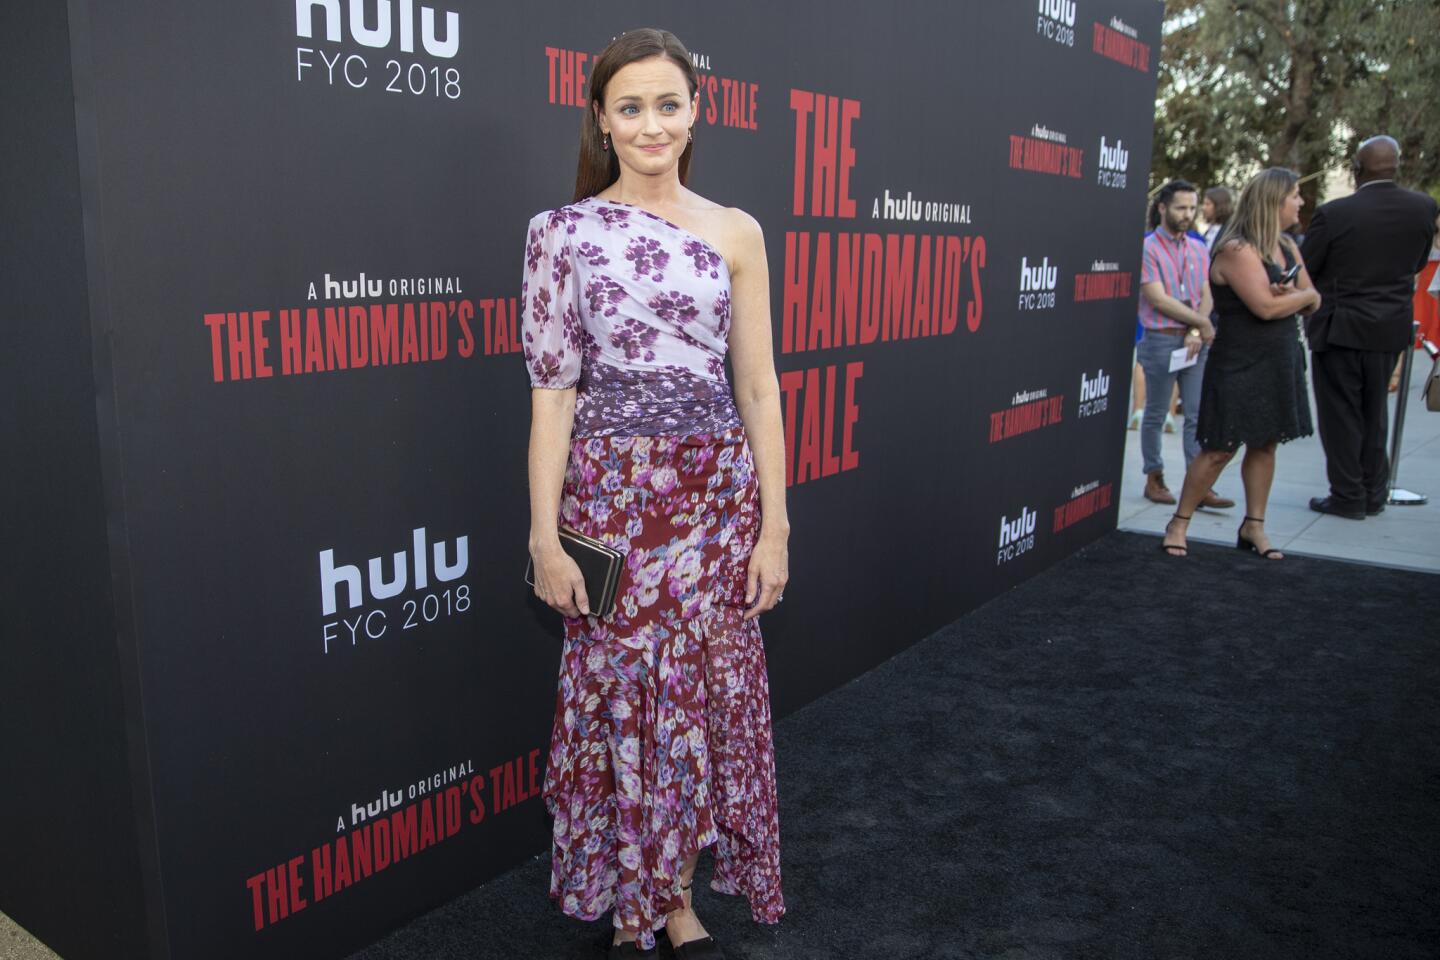 'Handmaid's Tale' finale event